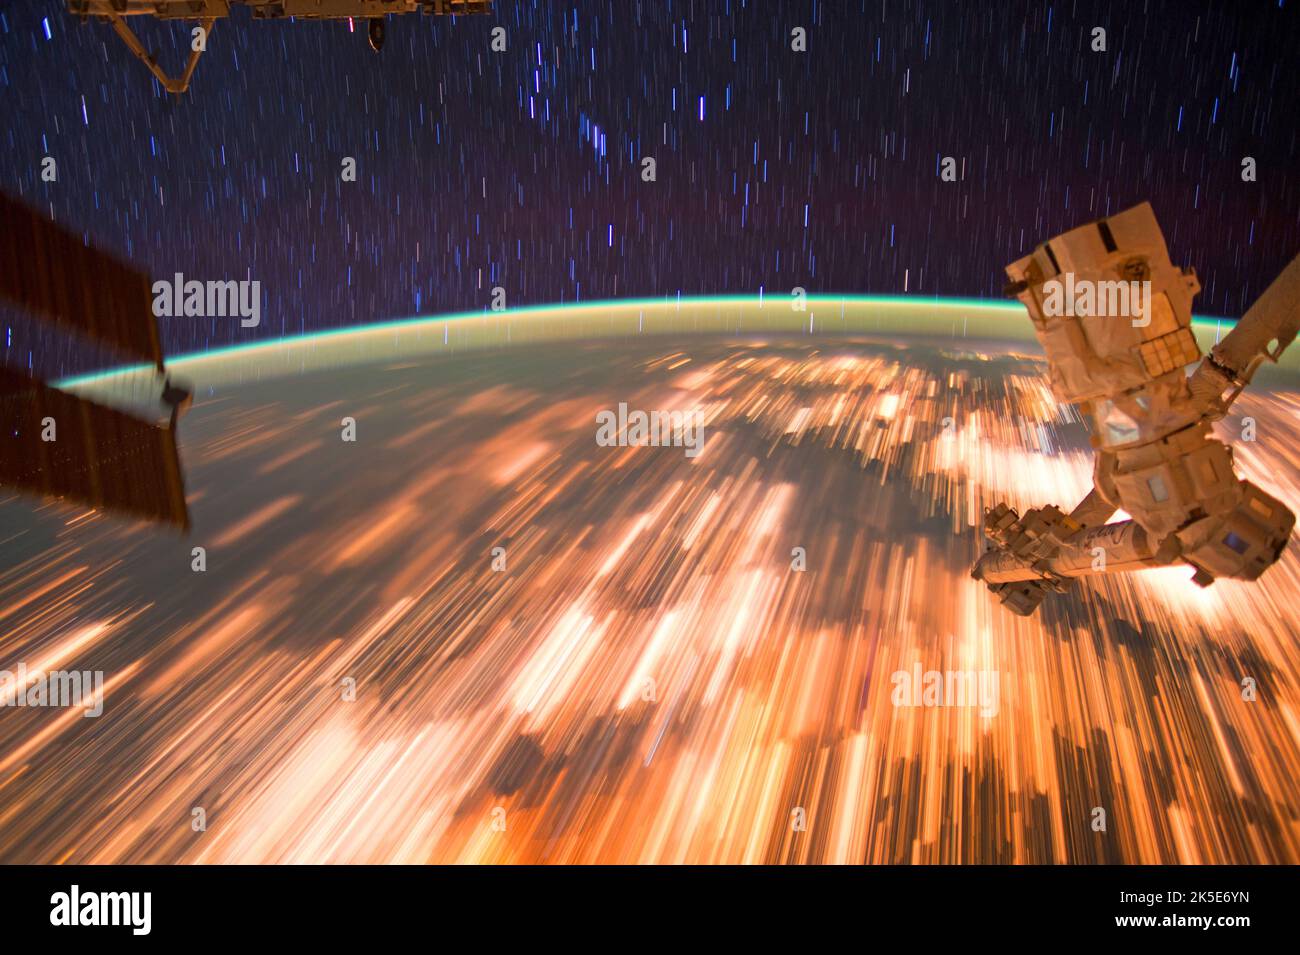 Astronauts on the International Space Station captured a series of incredible star trail images on 3 October 2016, as they orbited at 17,500 miles per hour. The station orbits the Earth every 90 minutes, and astronauts aboard see an average of 16 sunrises and sunsets every 24 hours. A unique version of an original NASA image. Credit: NASA? Stock Photo